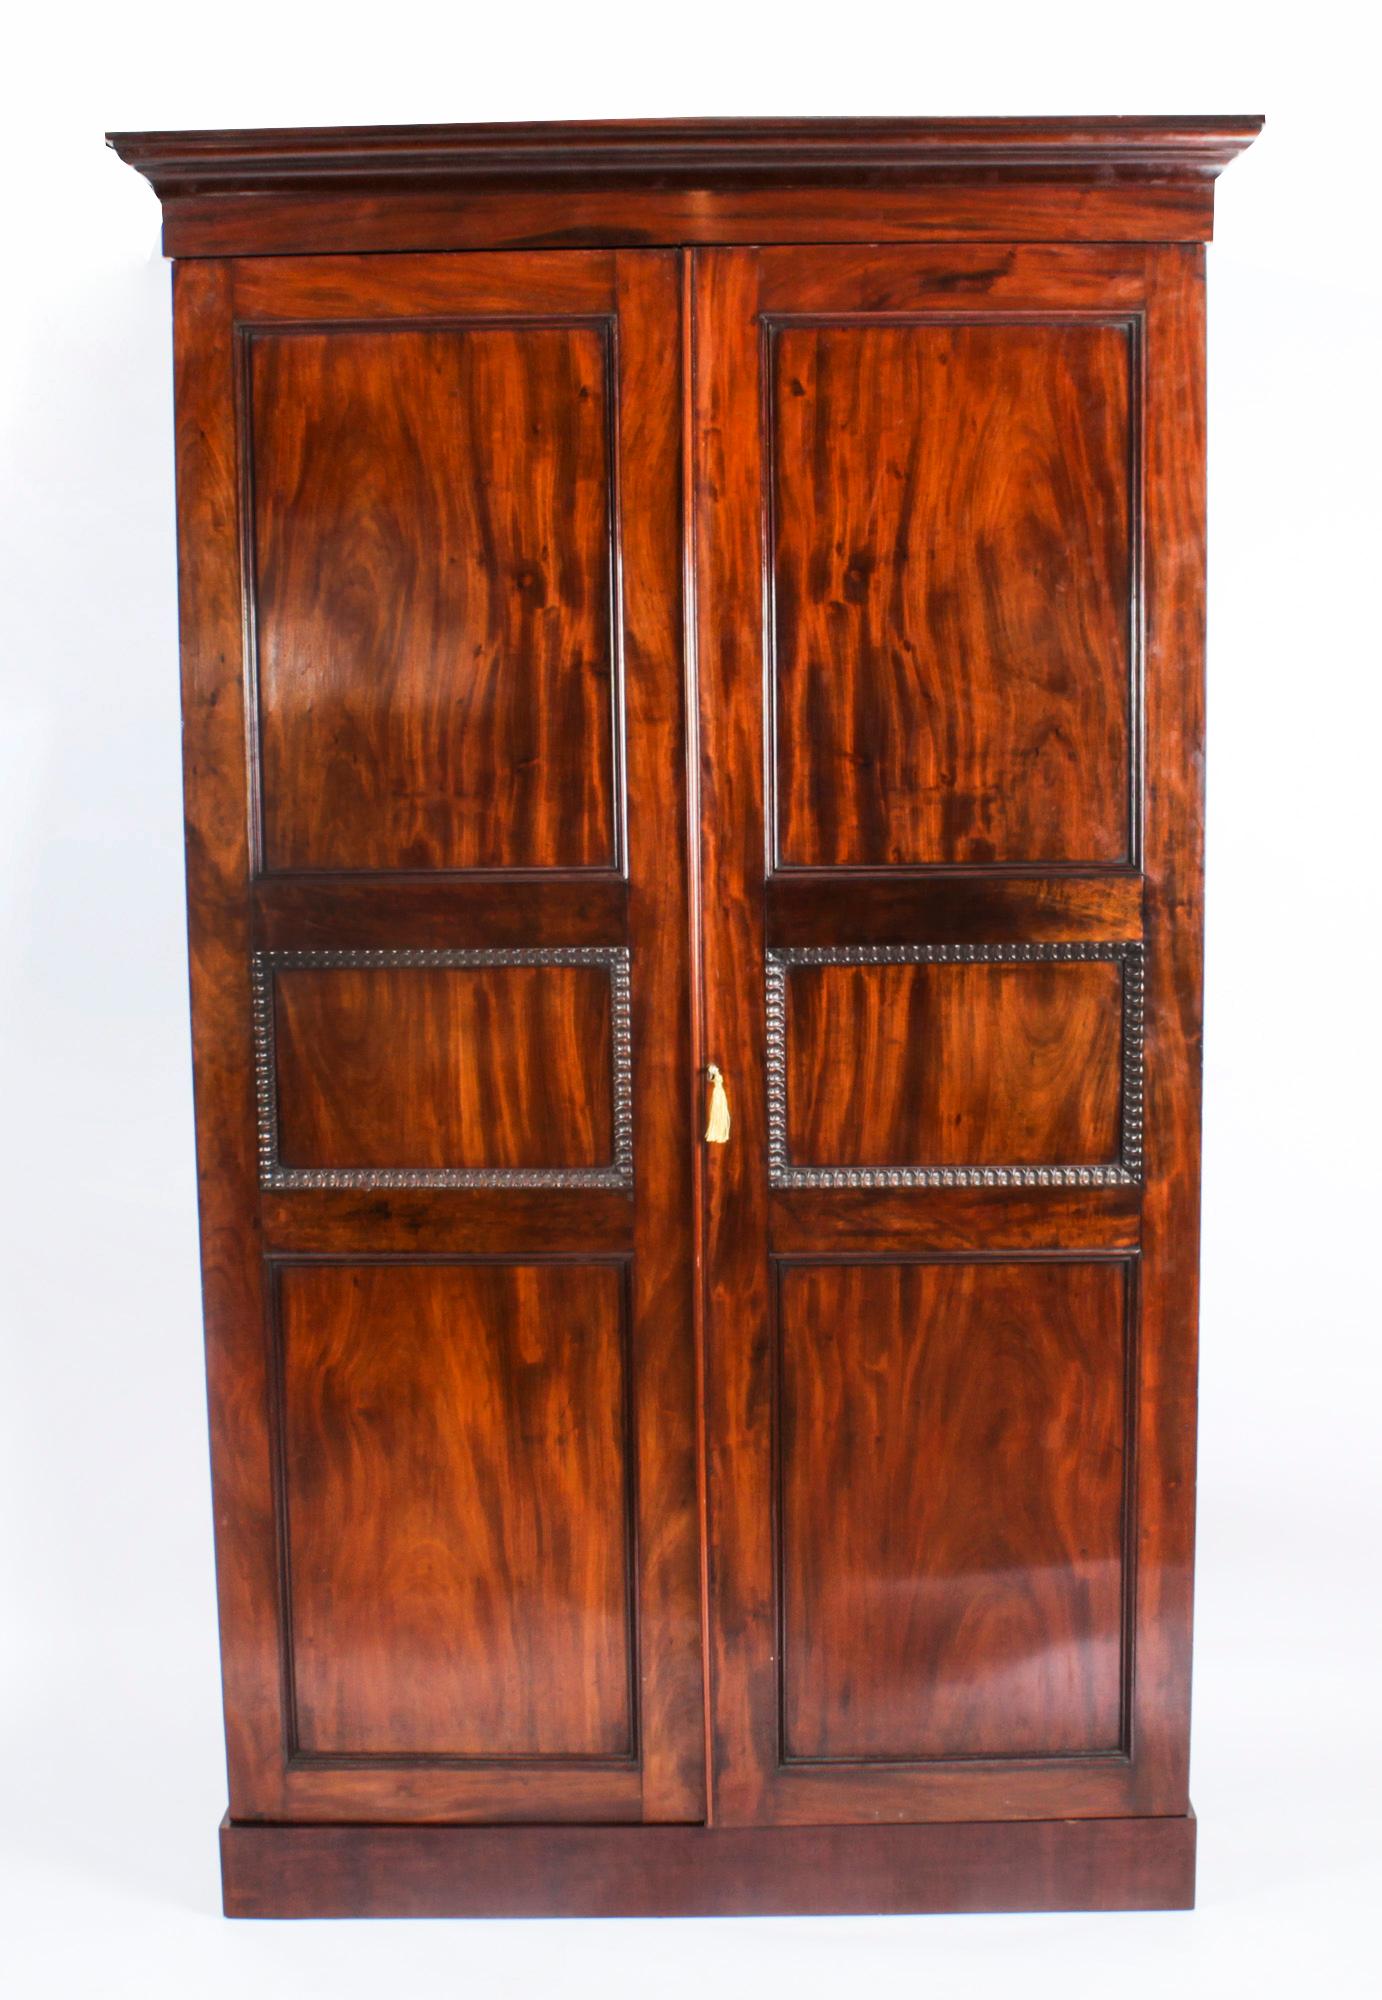 This is an impressive and elegant antique English Victorian flame mahogany wardrobe, circa 1880 in date.
 
This wonderful tall two door wardrobe features an exquisite flared cornice above highly attractive and beautifully figured flame mahogany